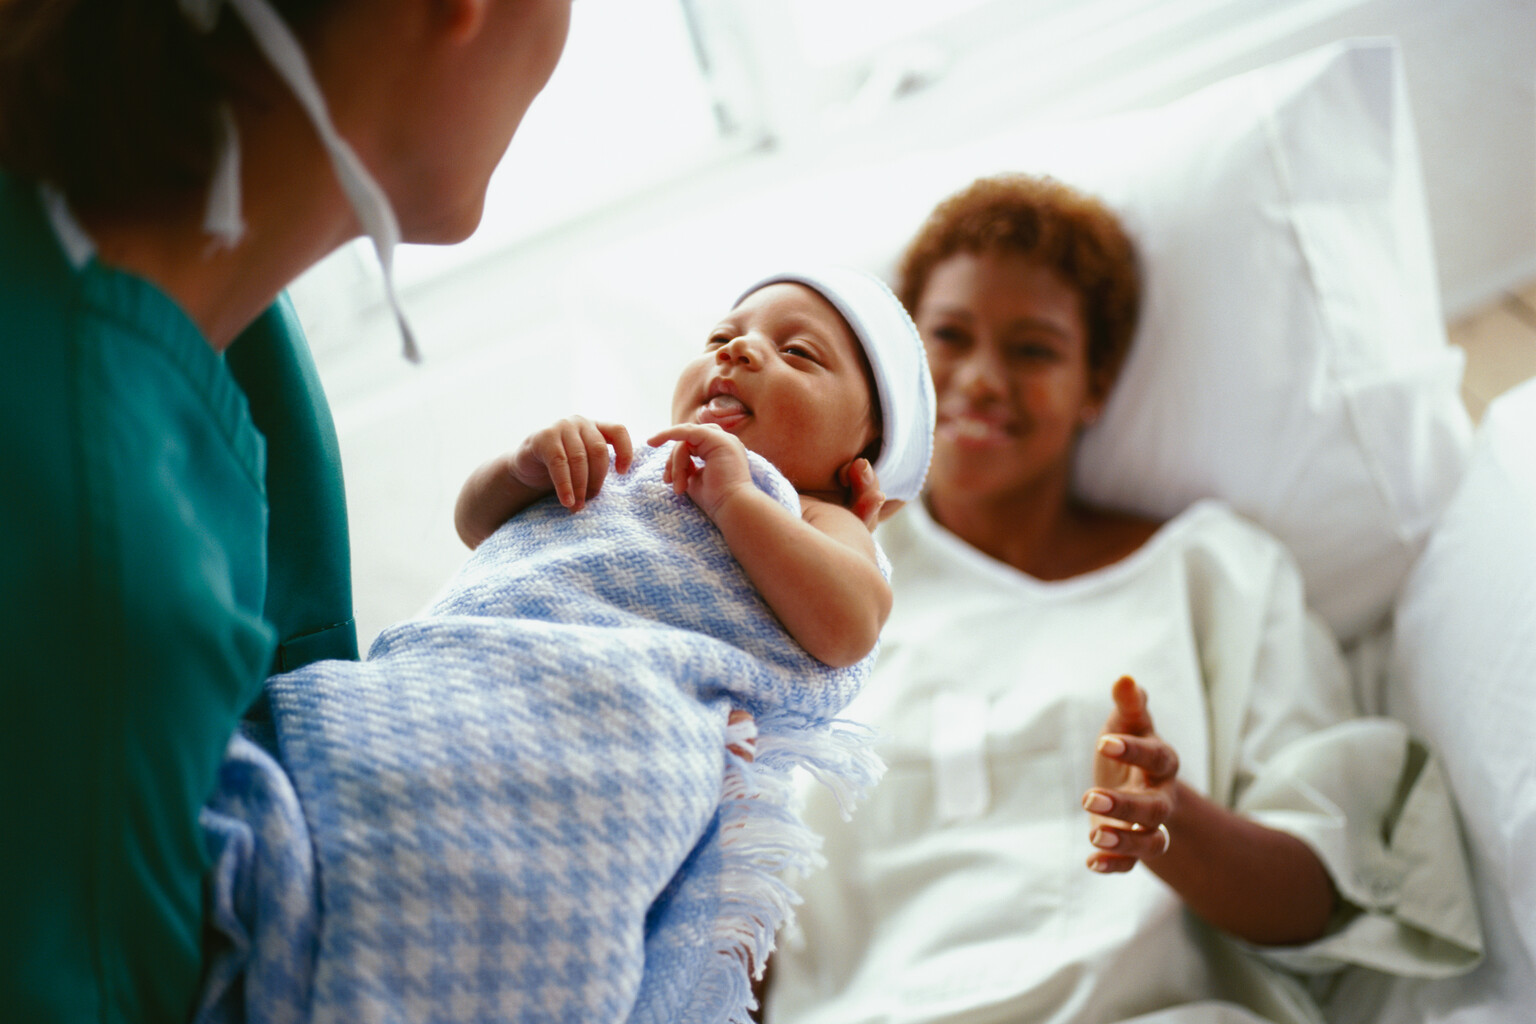 The role of providers and health plans in breastfeeding support